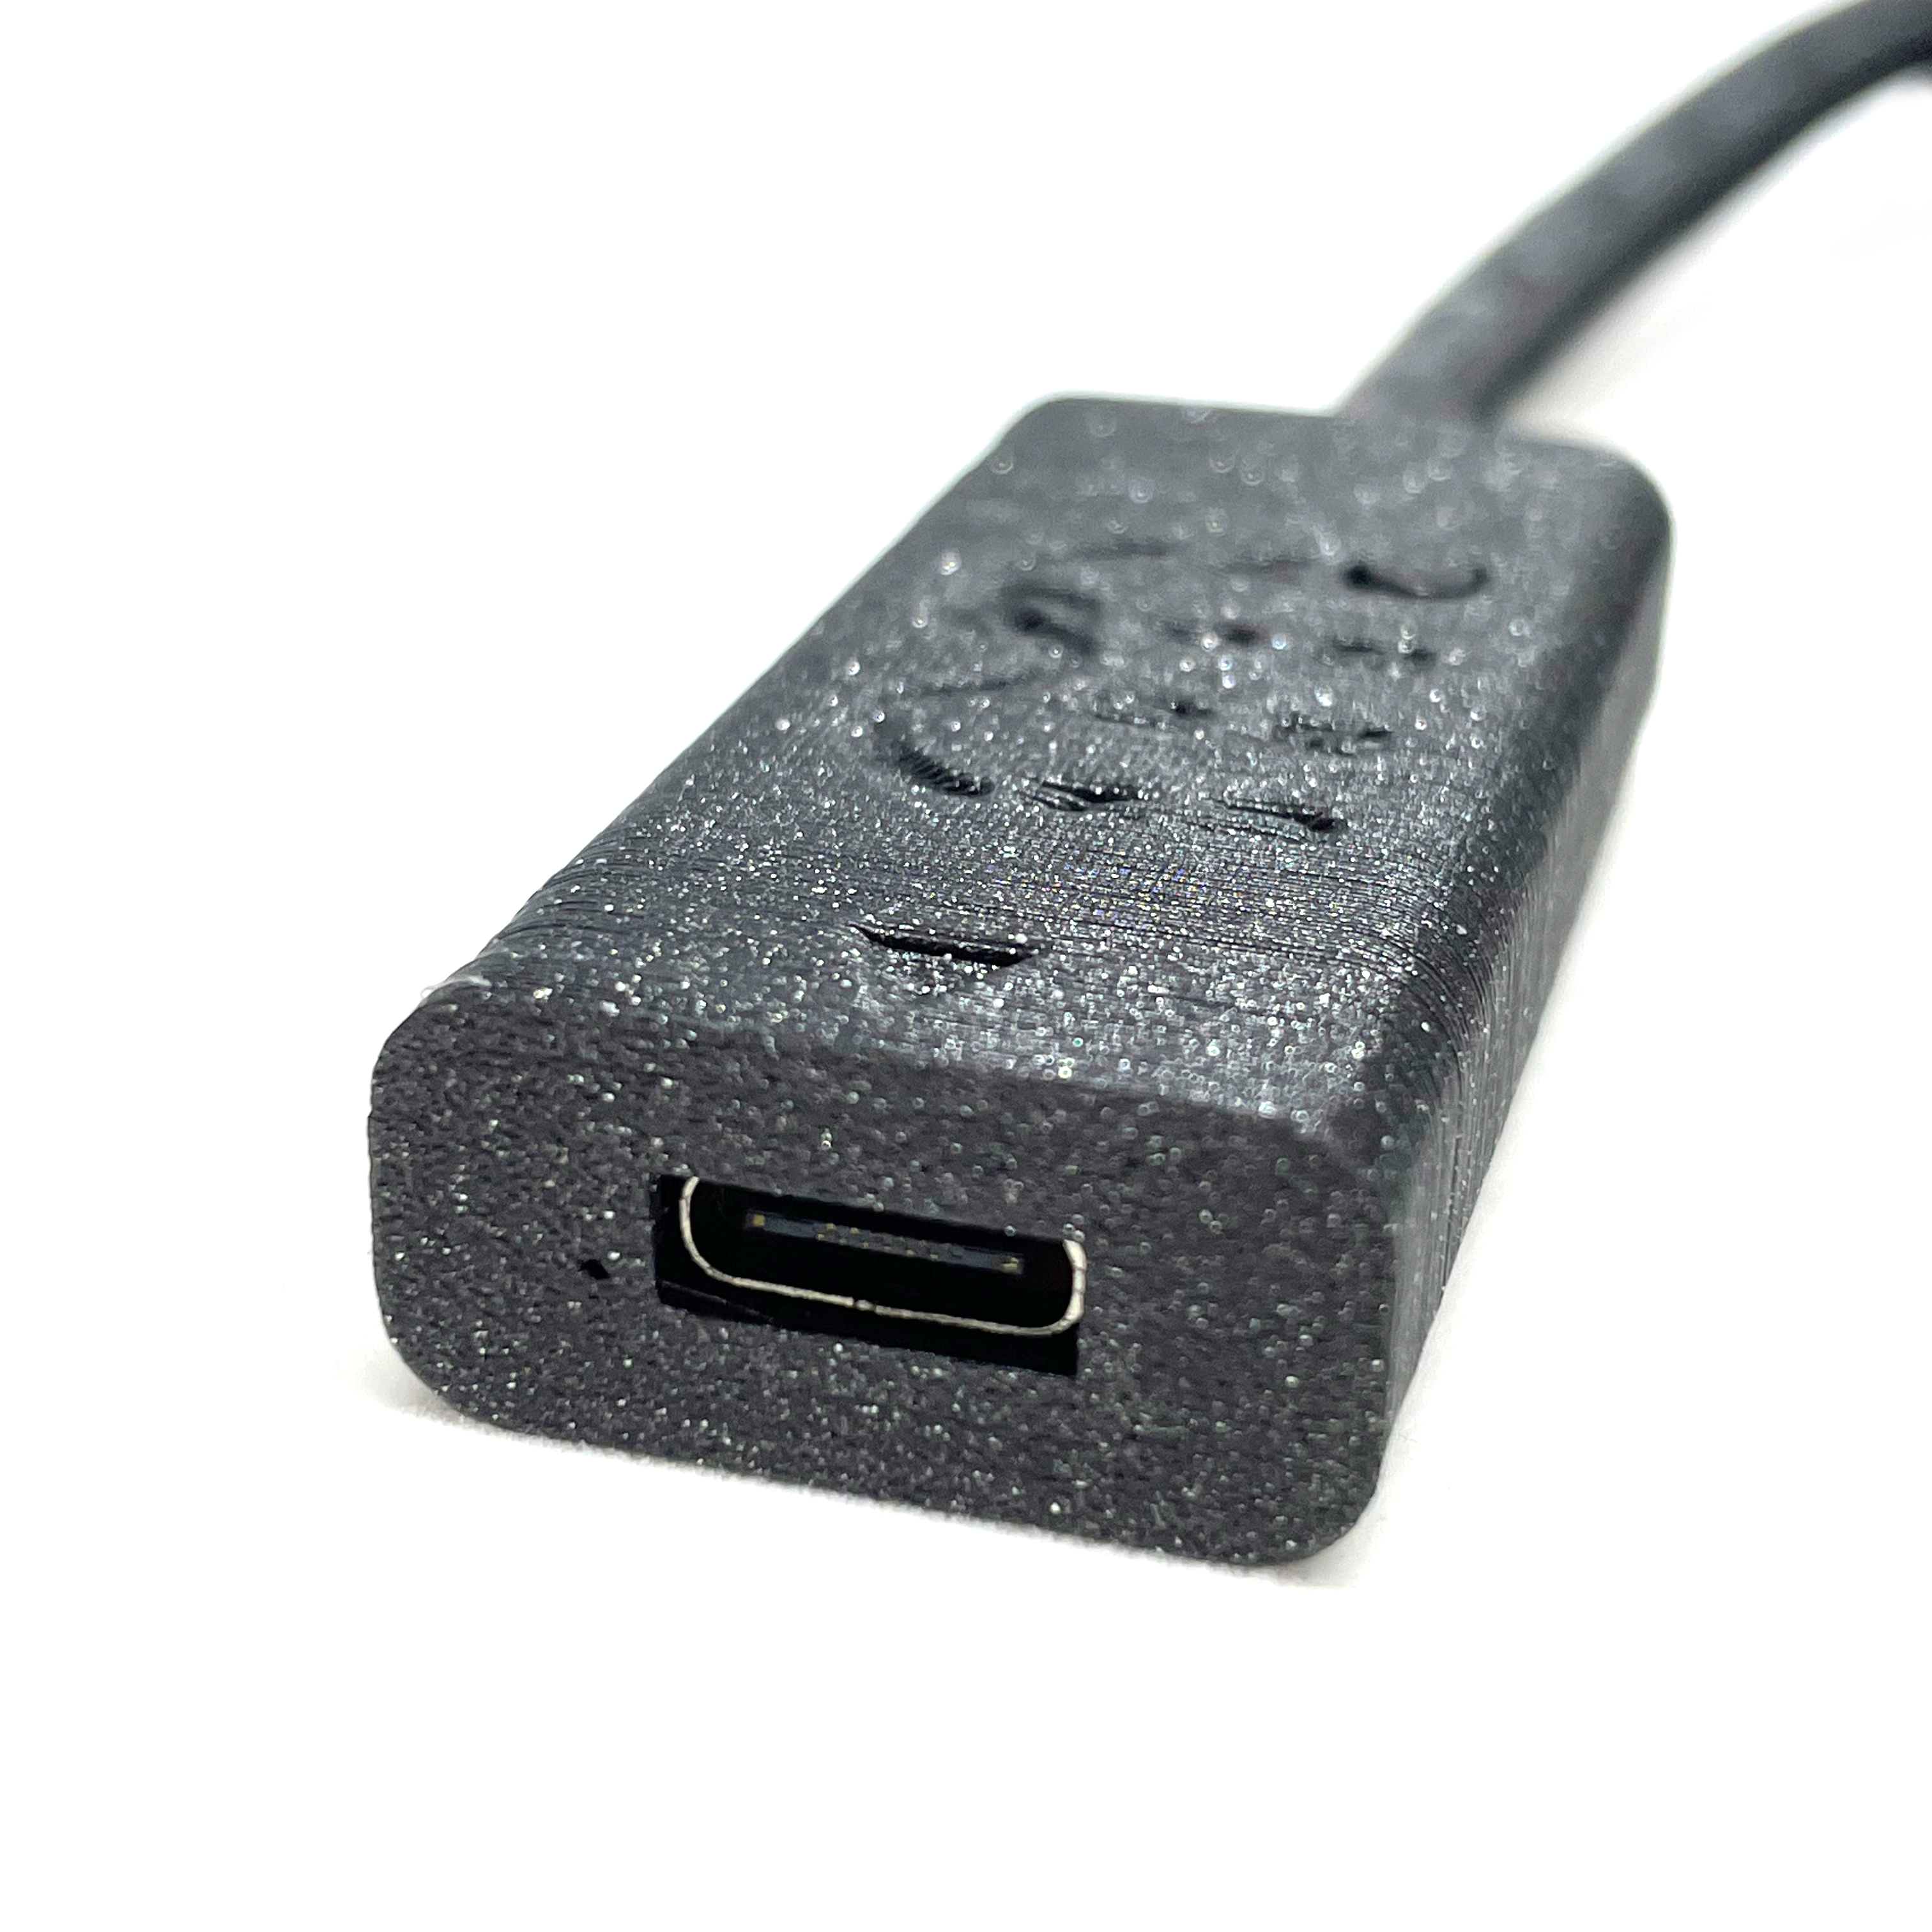 USB to Nuon Controller Adapter (NUON-USB)